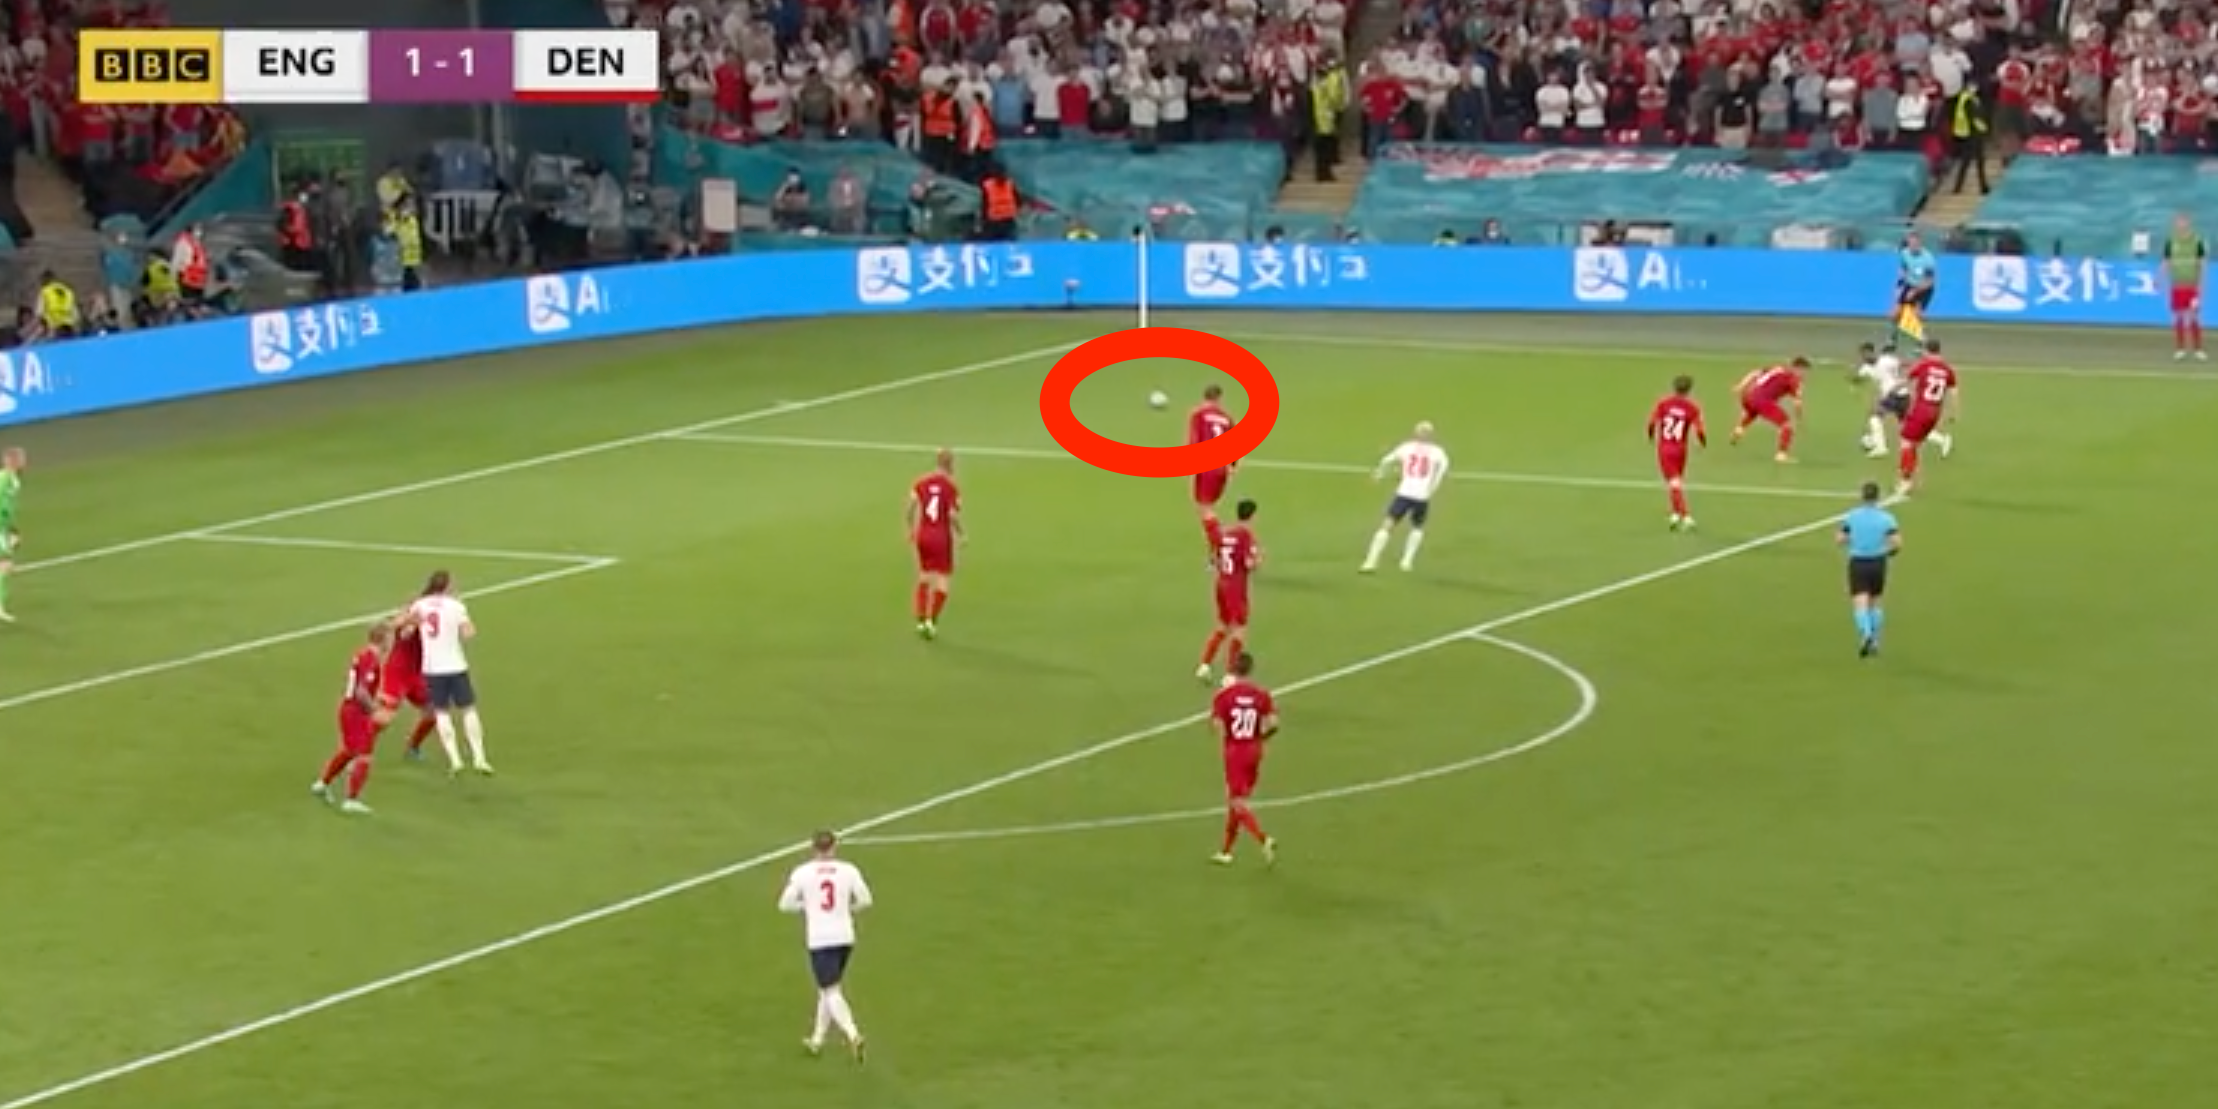 A second ball on the field just before England was awarded a penalty in its Euro 2020 semifinal against Denmark.